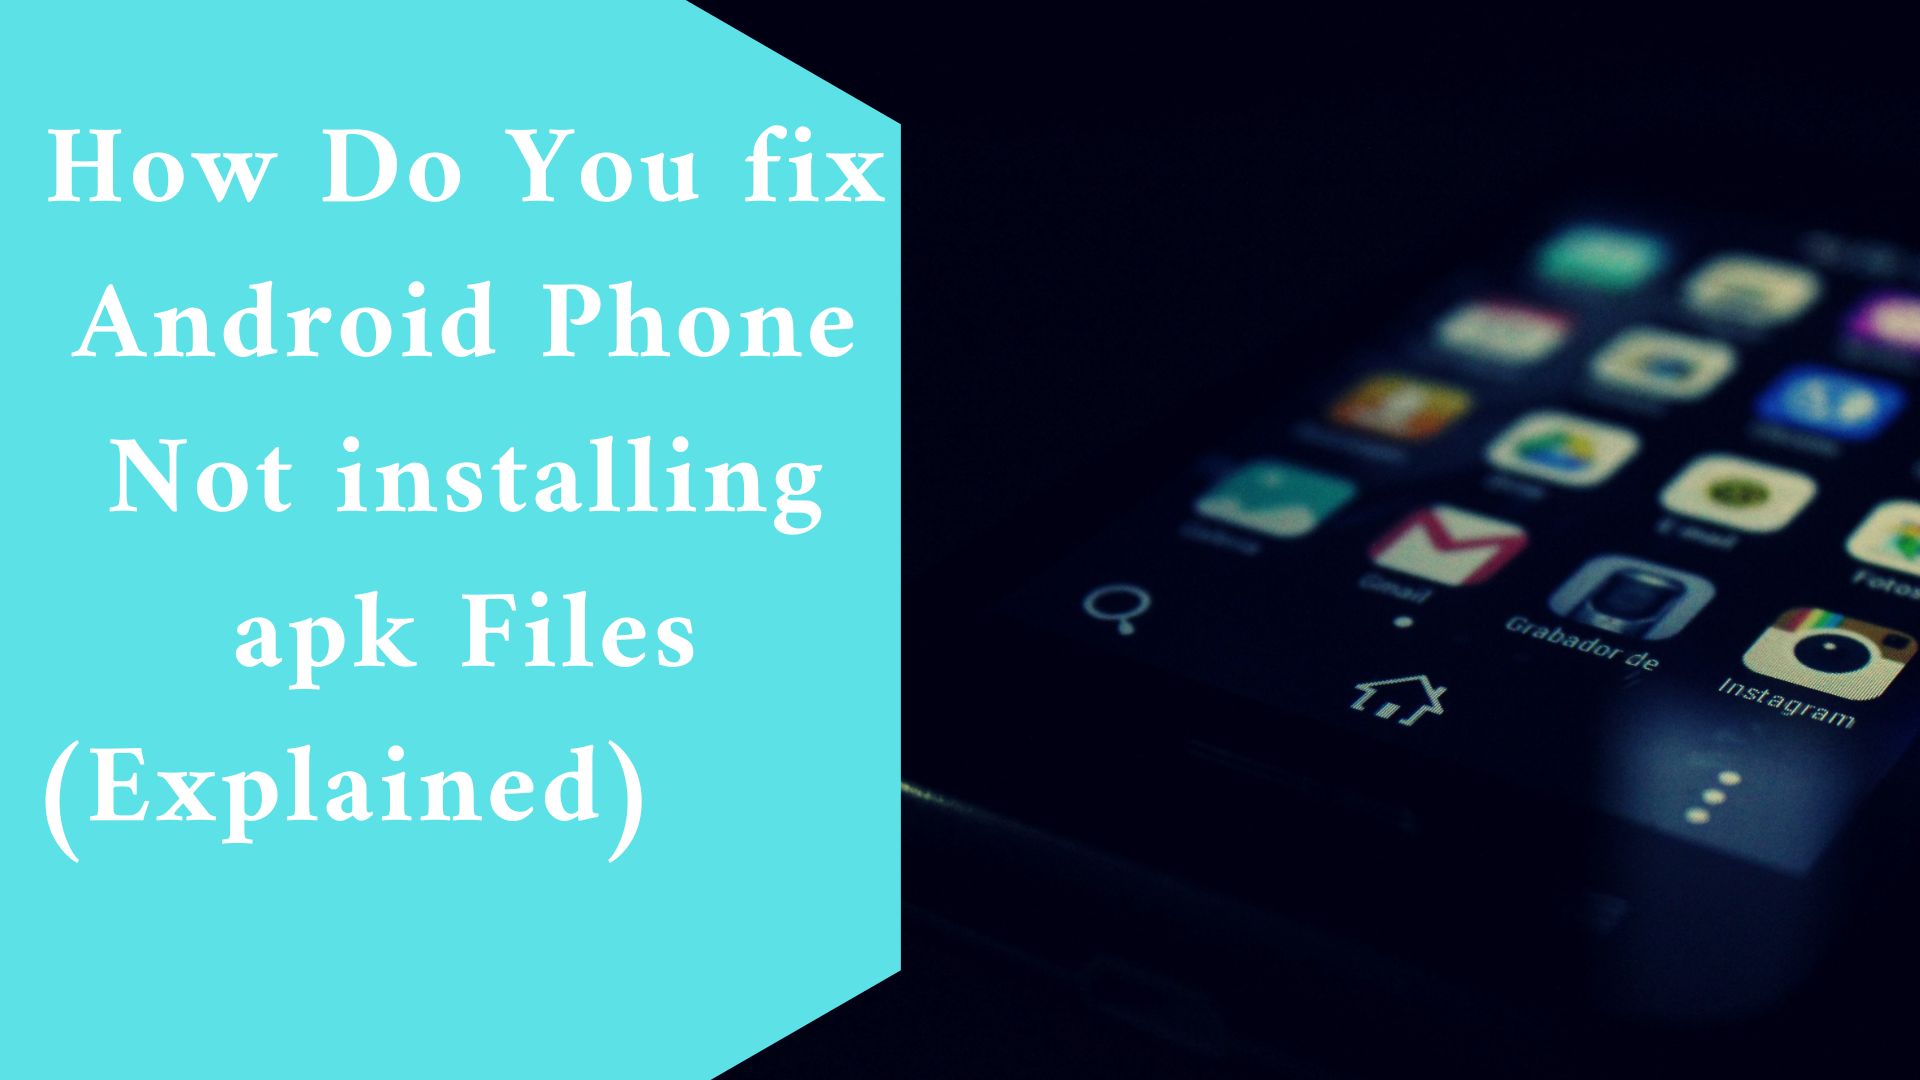 How Do You fix Android Phone Not installing apk Files (Explained)